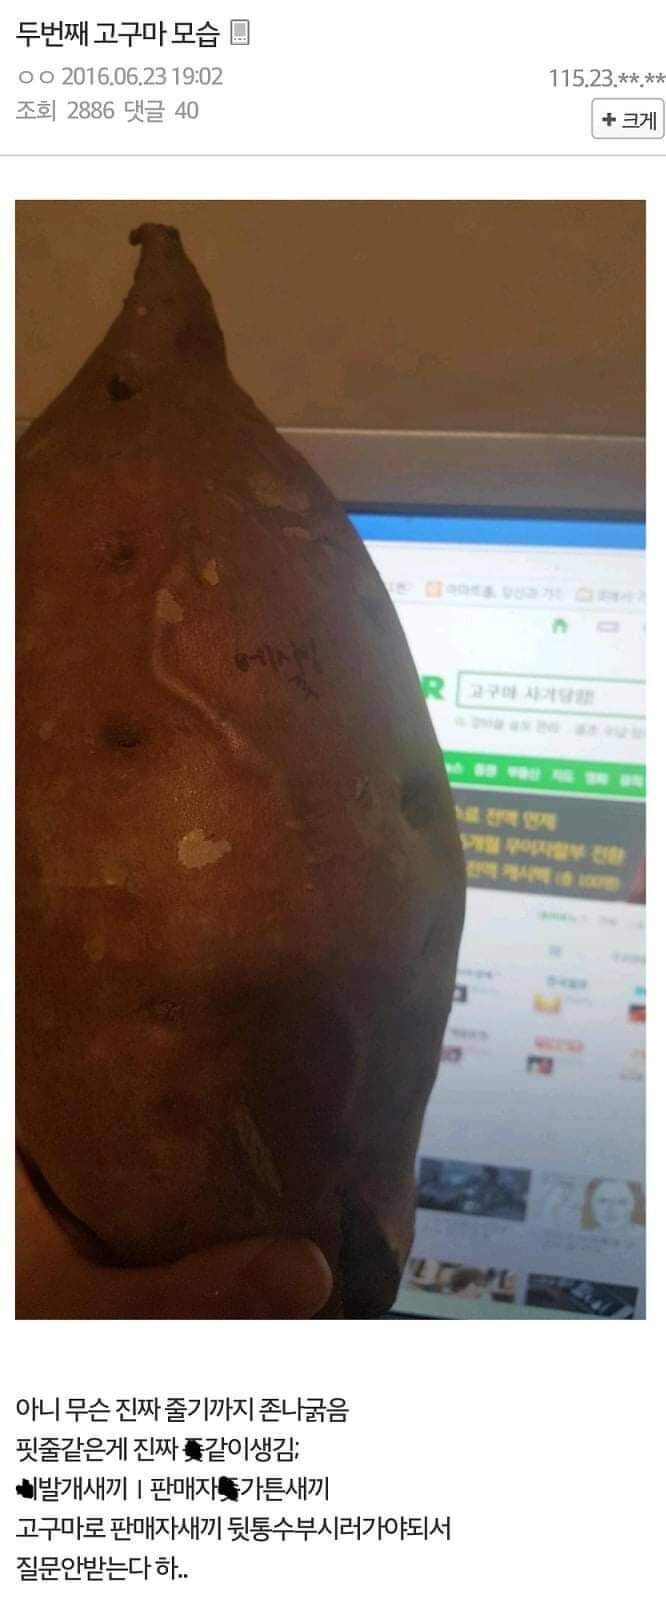 Reason for selling sweet potatoes in 6kg units